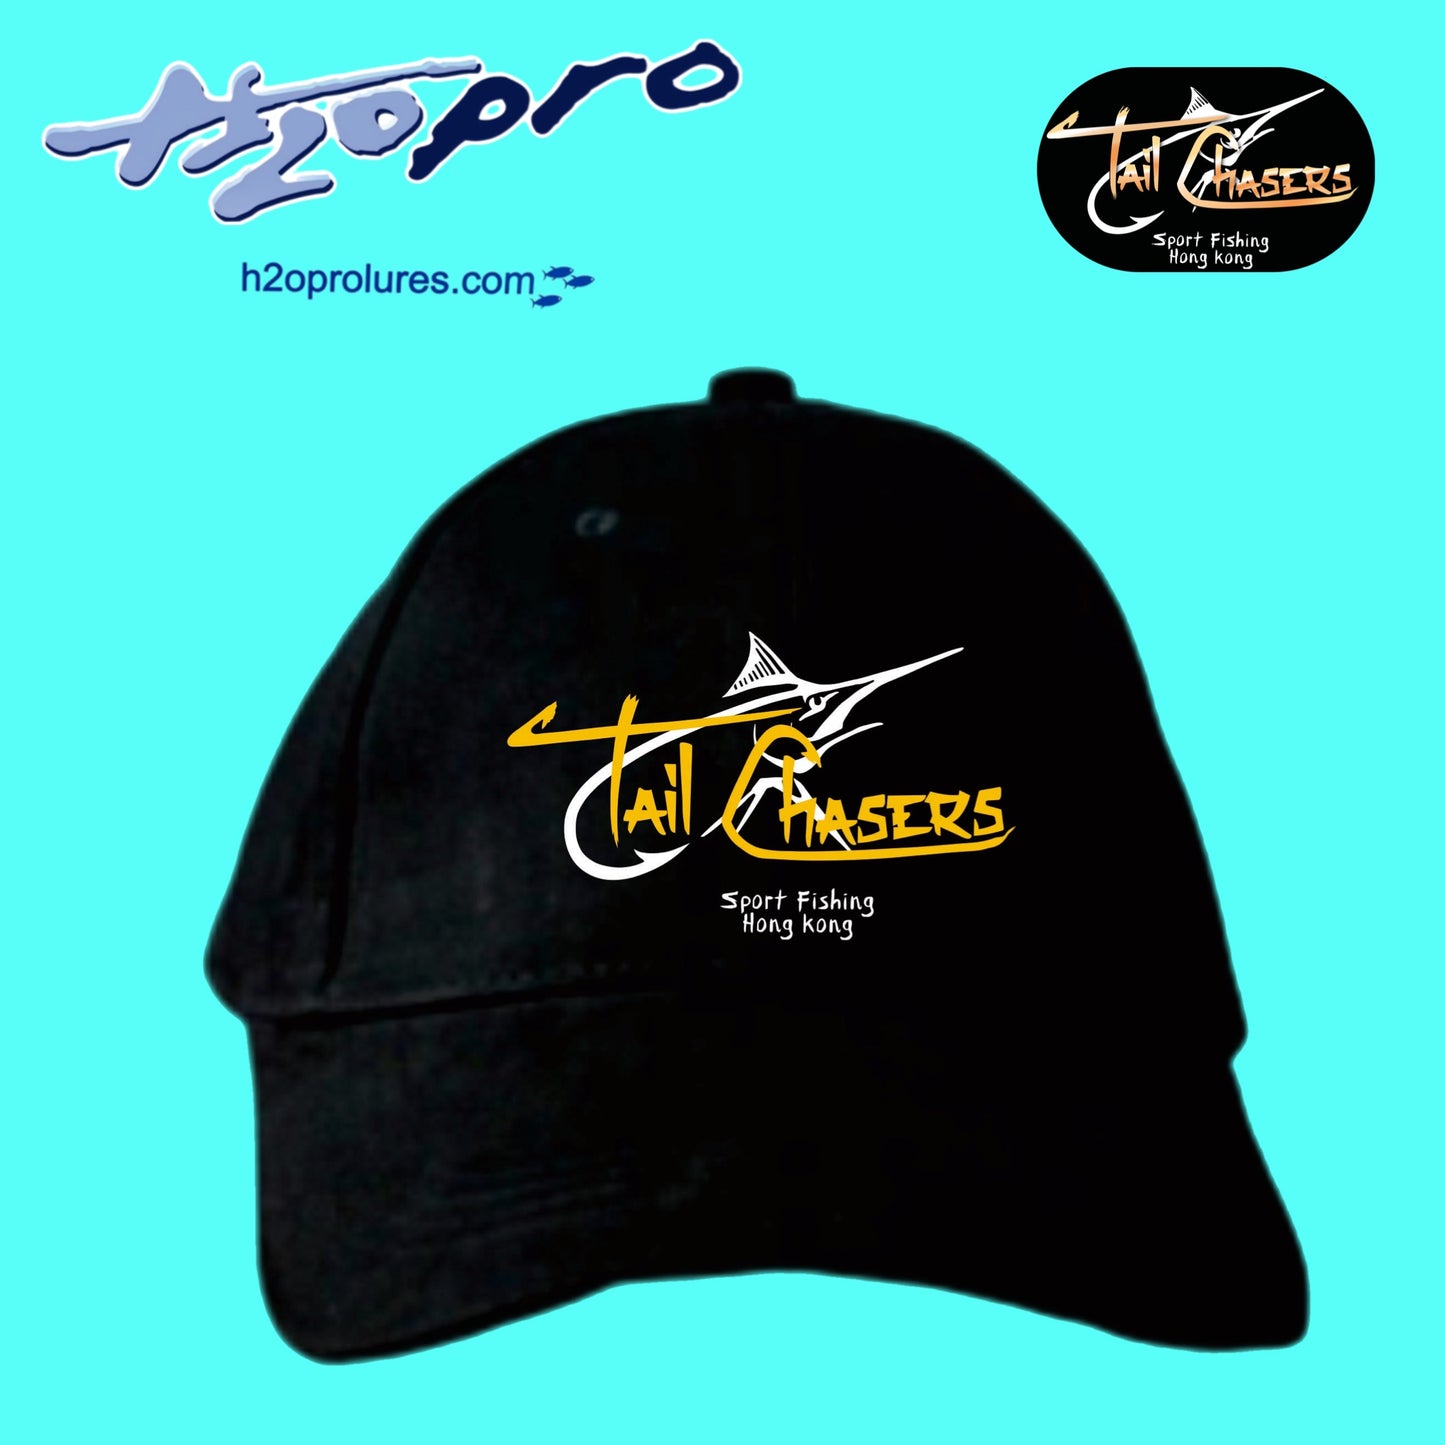 Tailchasers Sport Fishing Caps